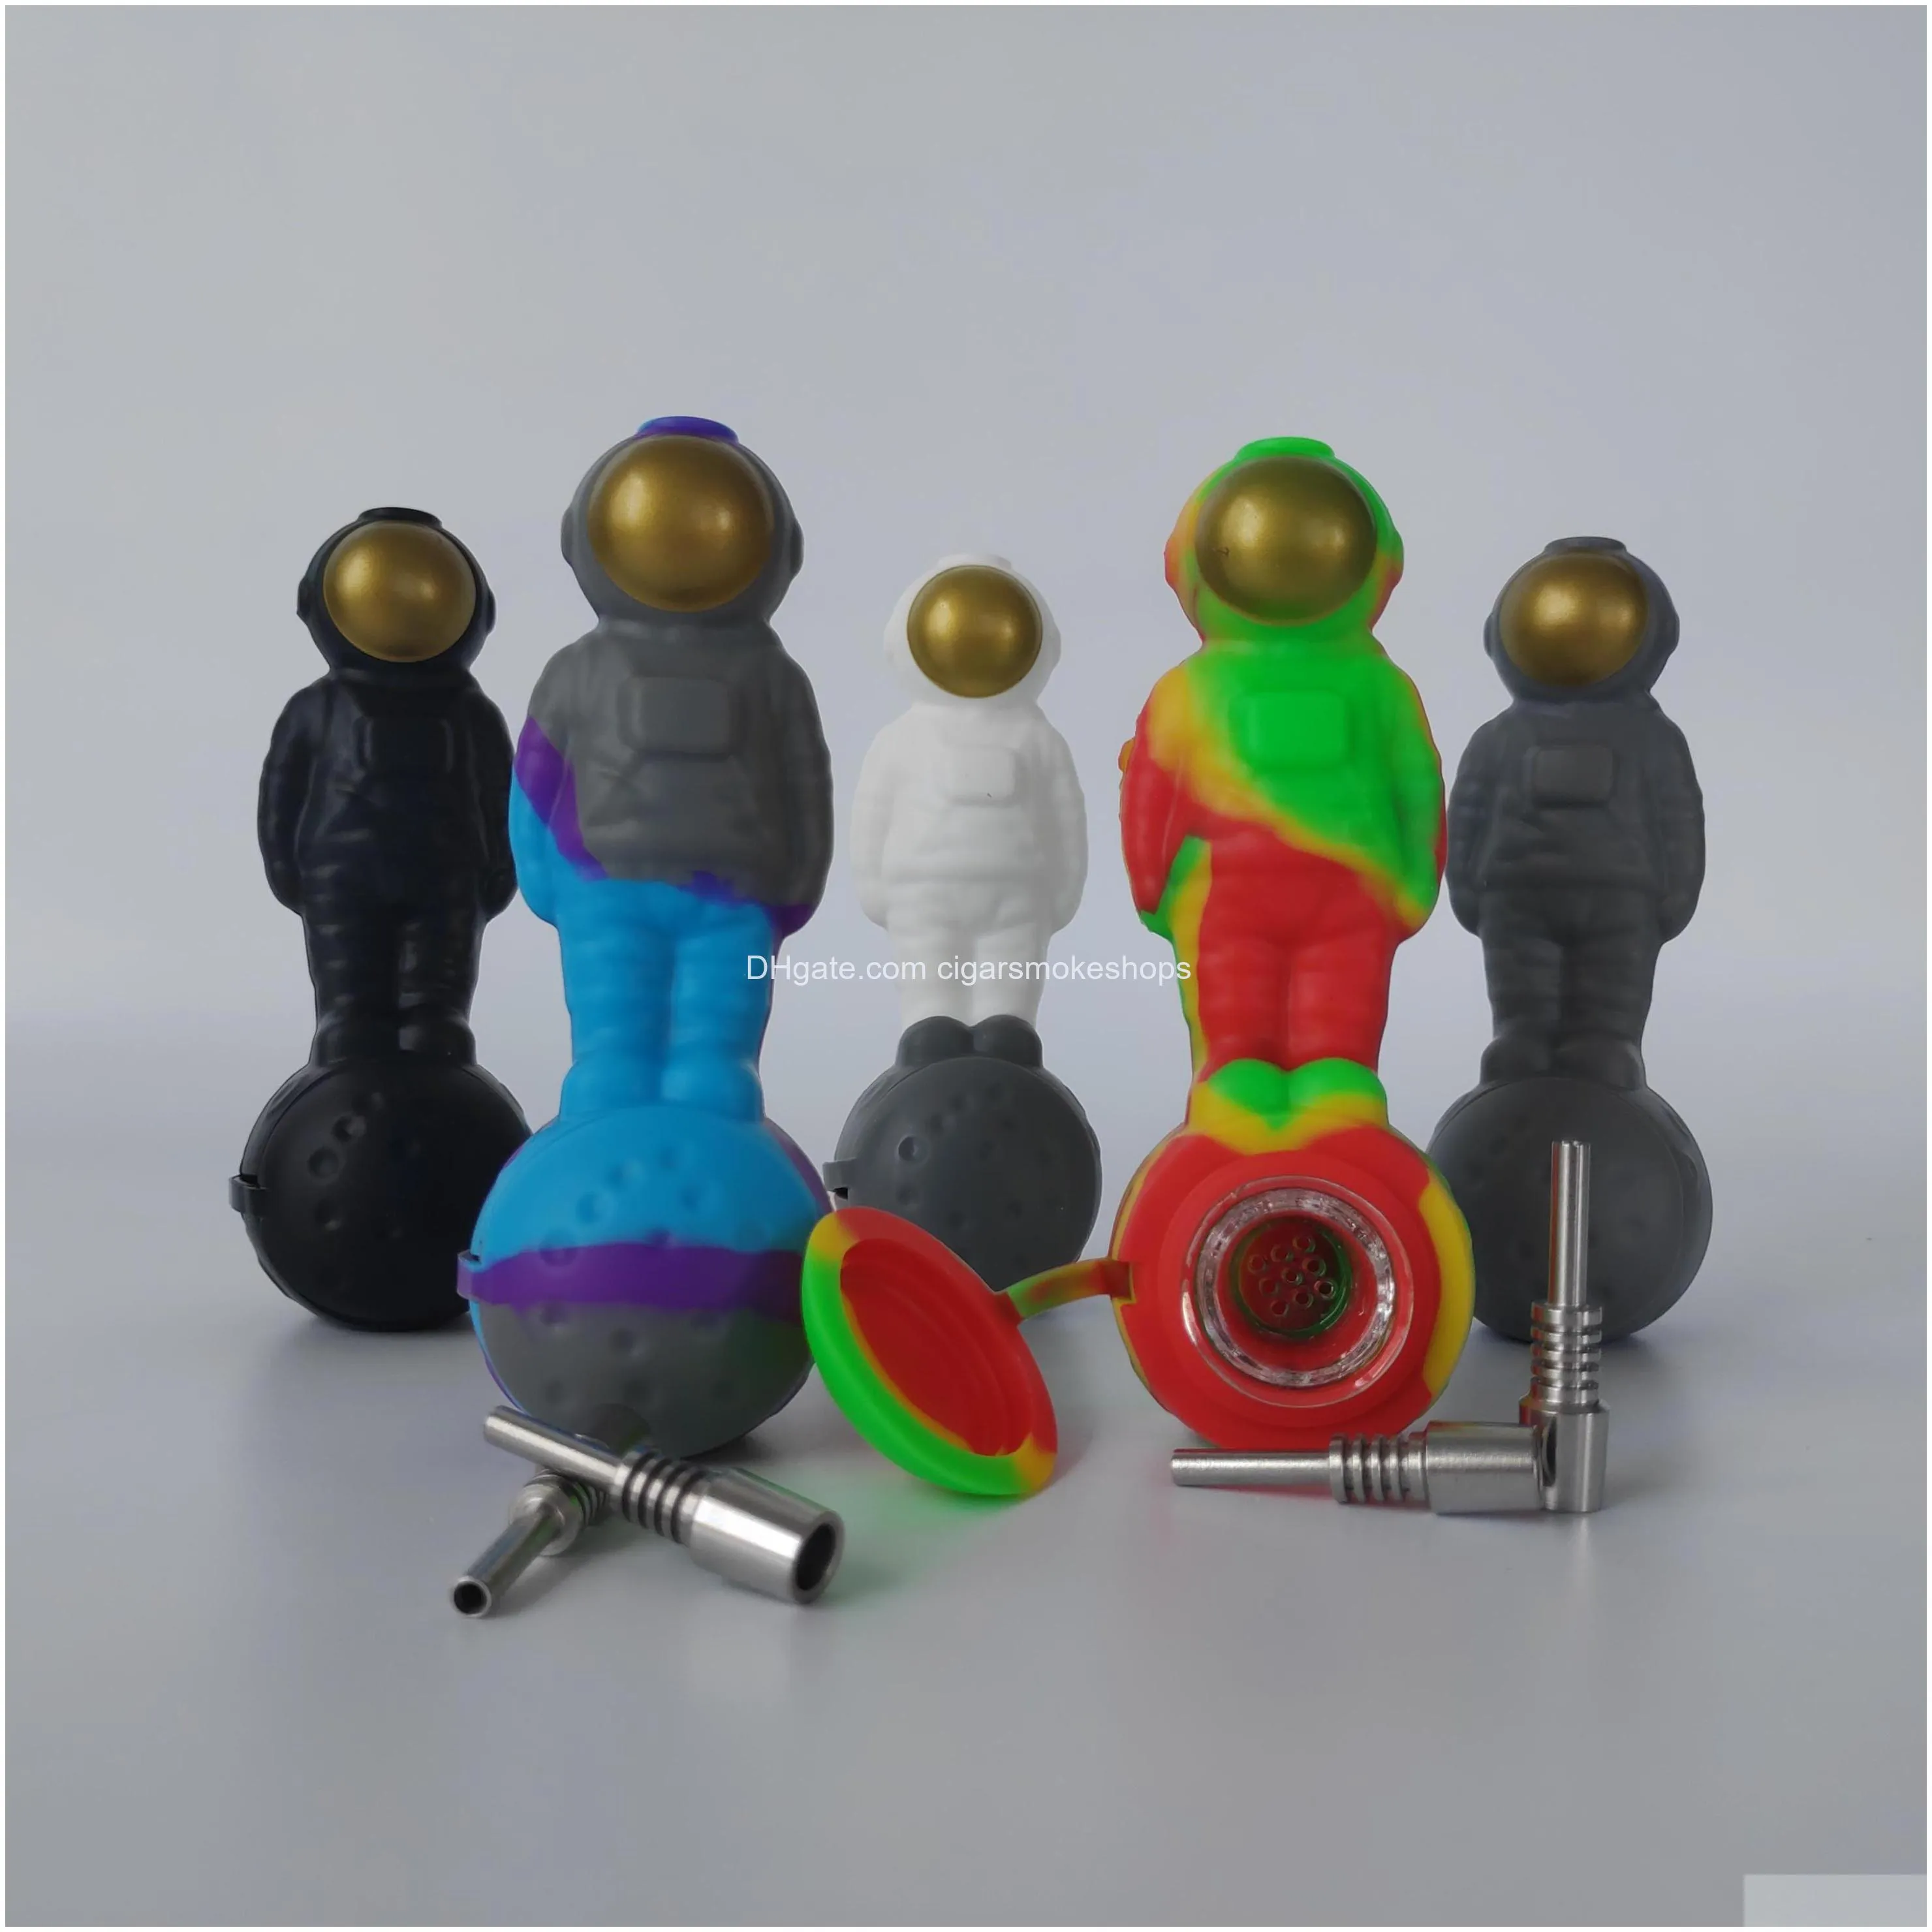 moon spaceman pipe silicone smoking pipes 4.9 inches length oil burner multirole smoke accessories mix color designs